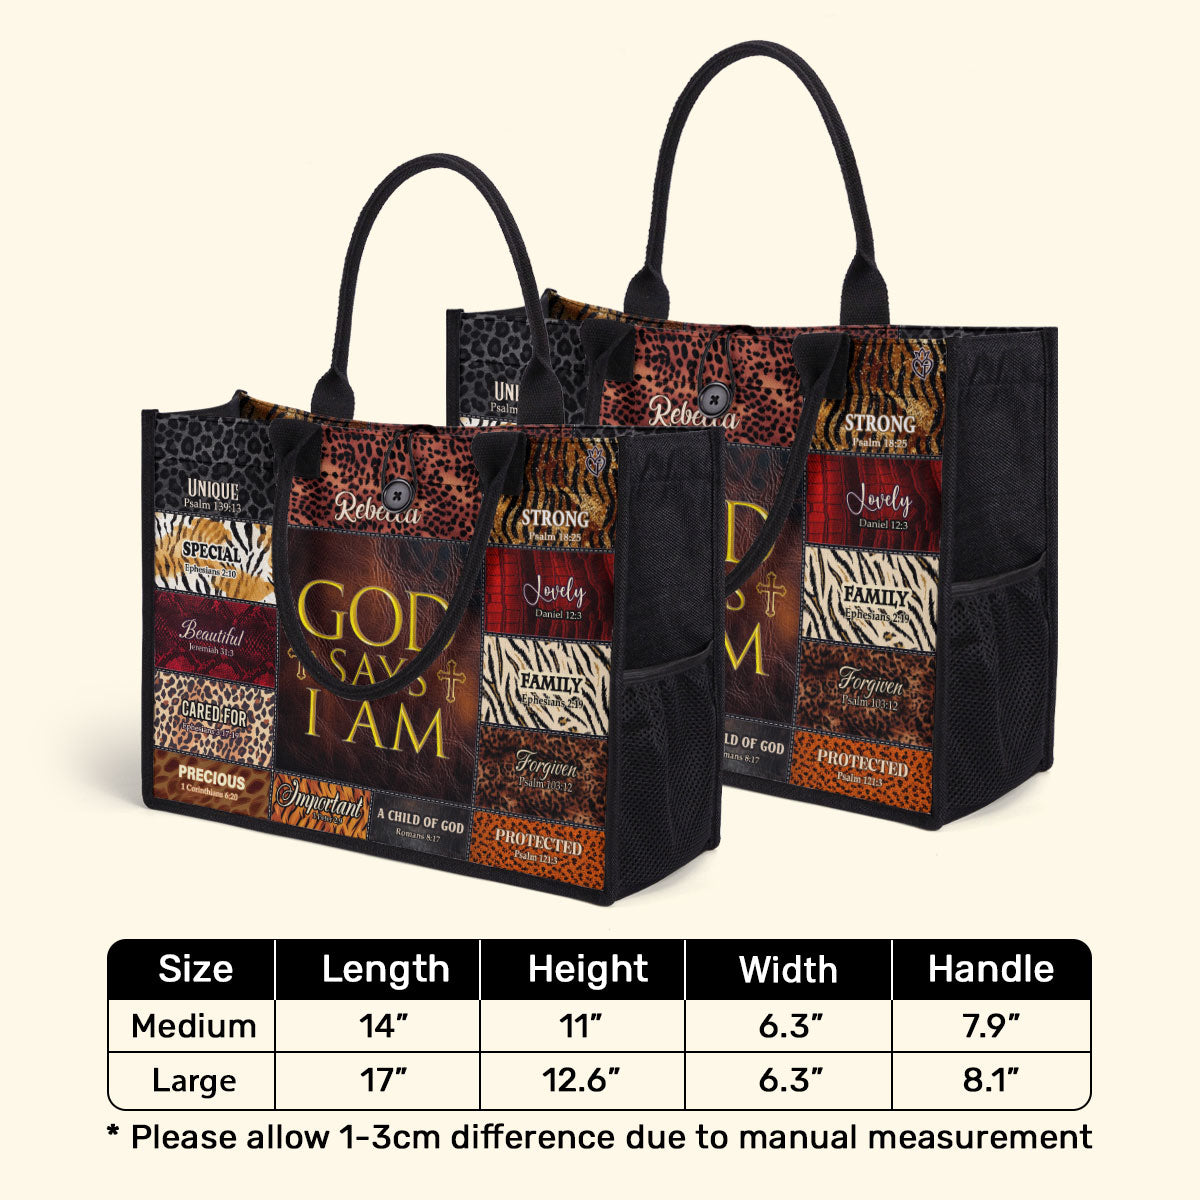 God Says I Am- Personalized Canvas Tote Bag TCVM07